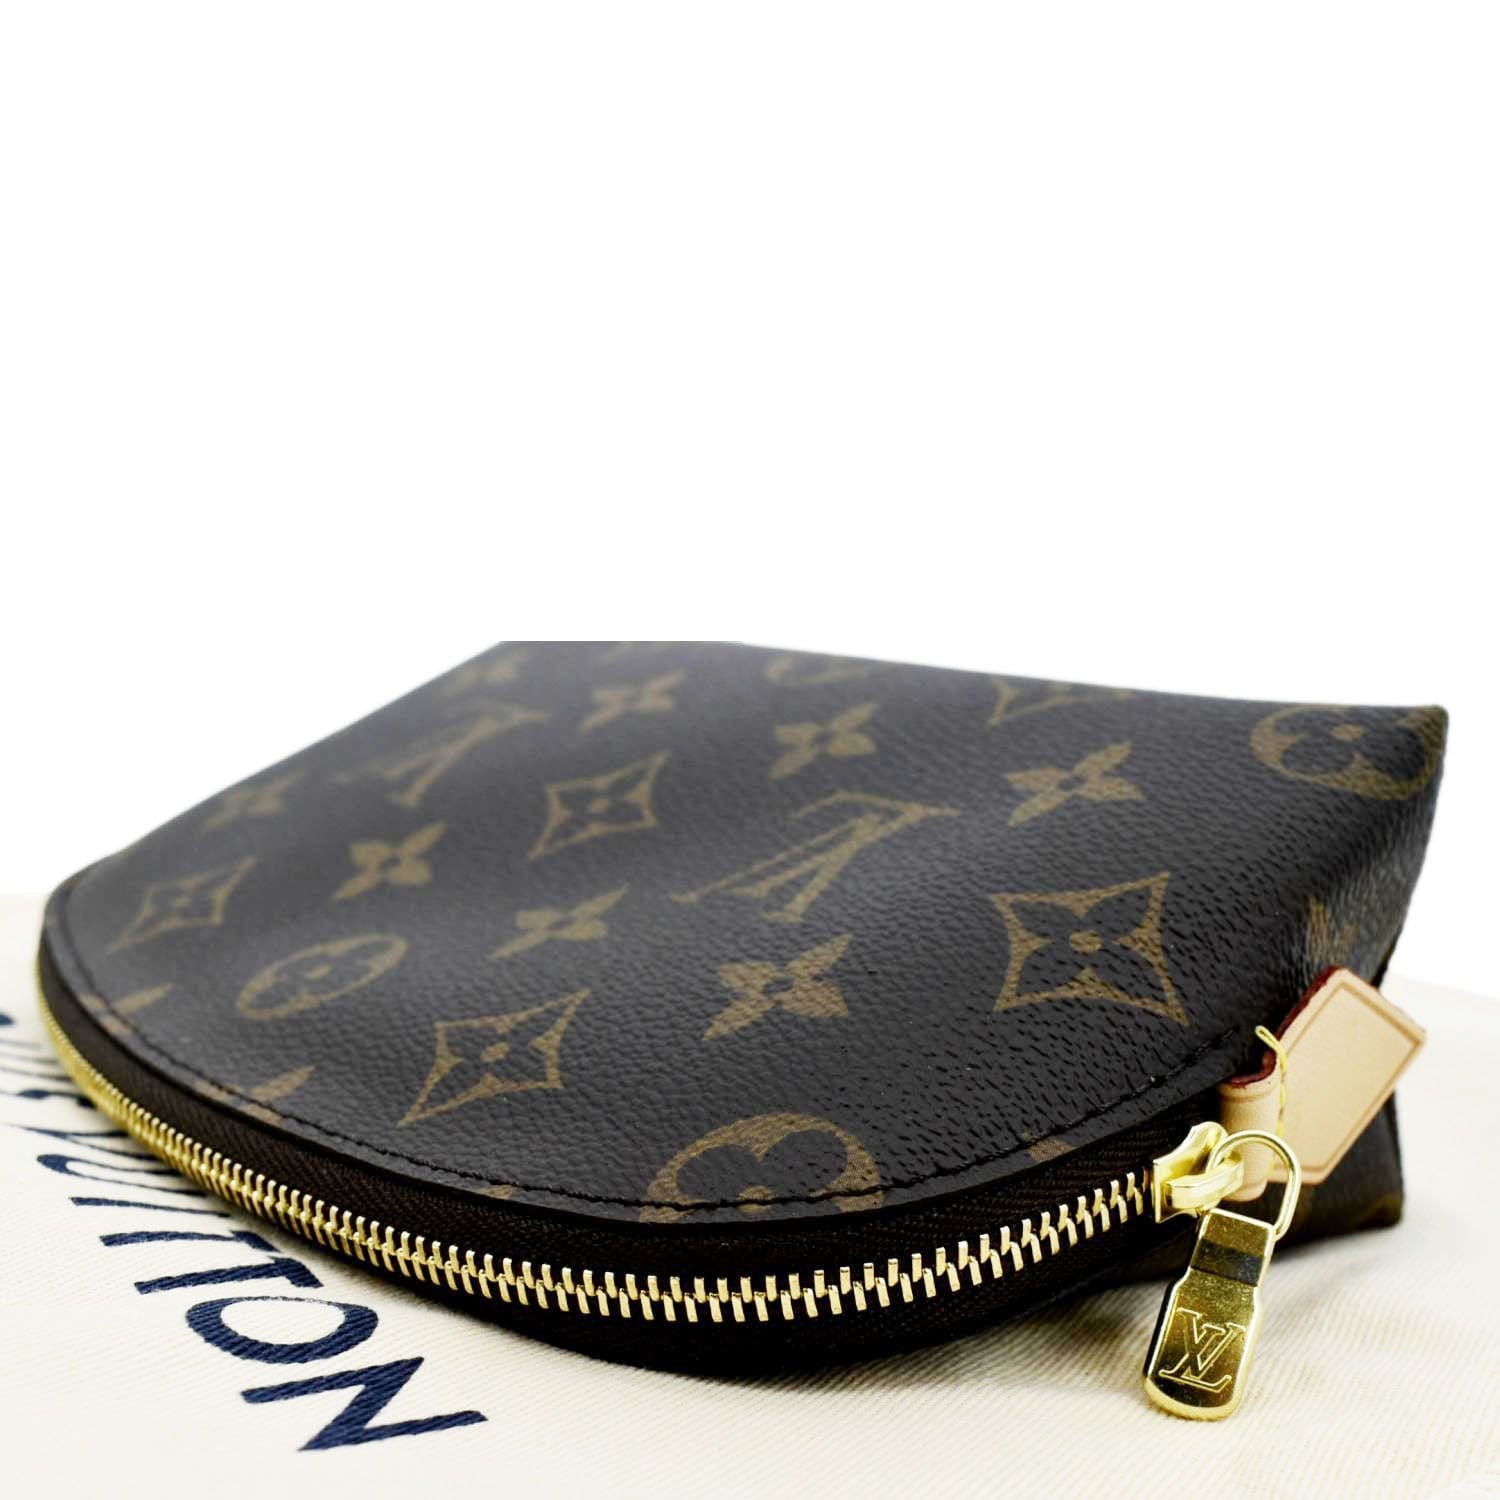 Louis Vuitton Toiletry Pouch Pm in Brown